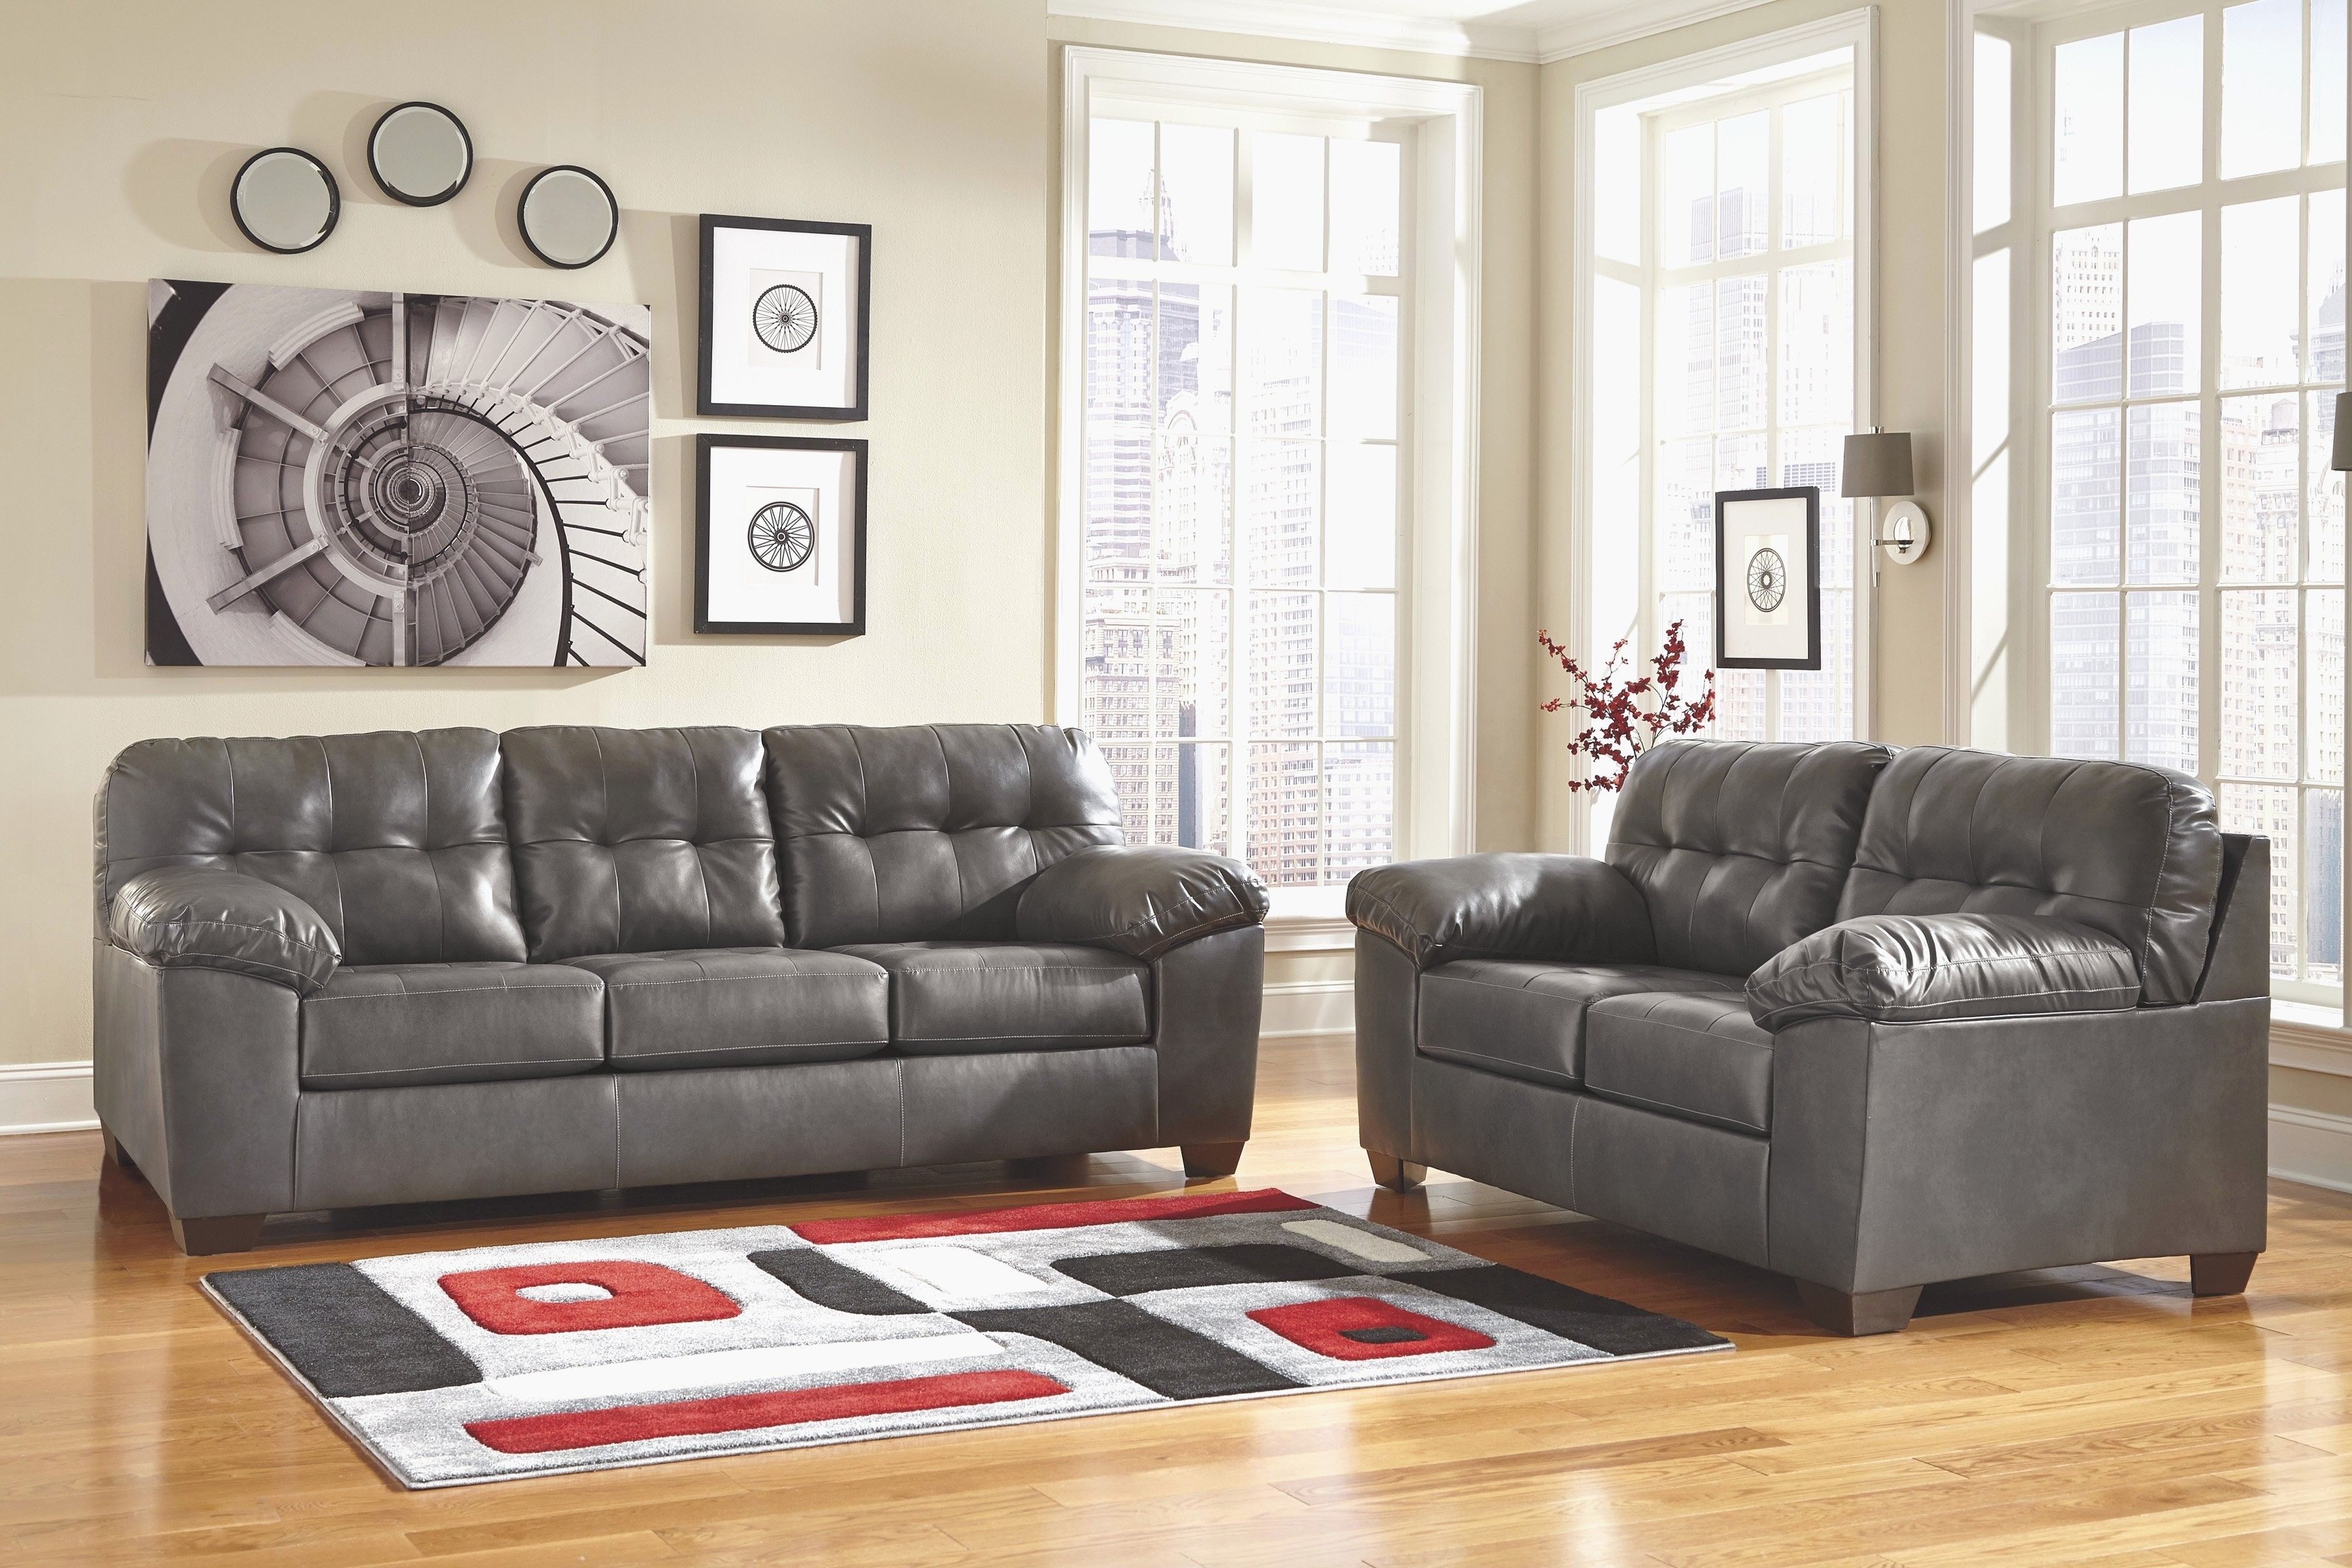 Ashley Furniture Sectional Sofas Sale Inspirational Leather Intended For Meyer 3 Piece Sectionals With Laf Chaise (View 29 of 30)